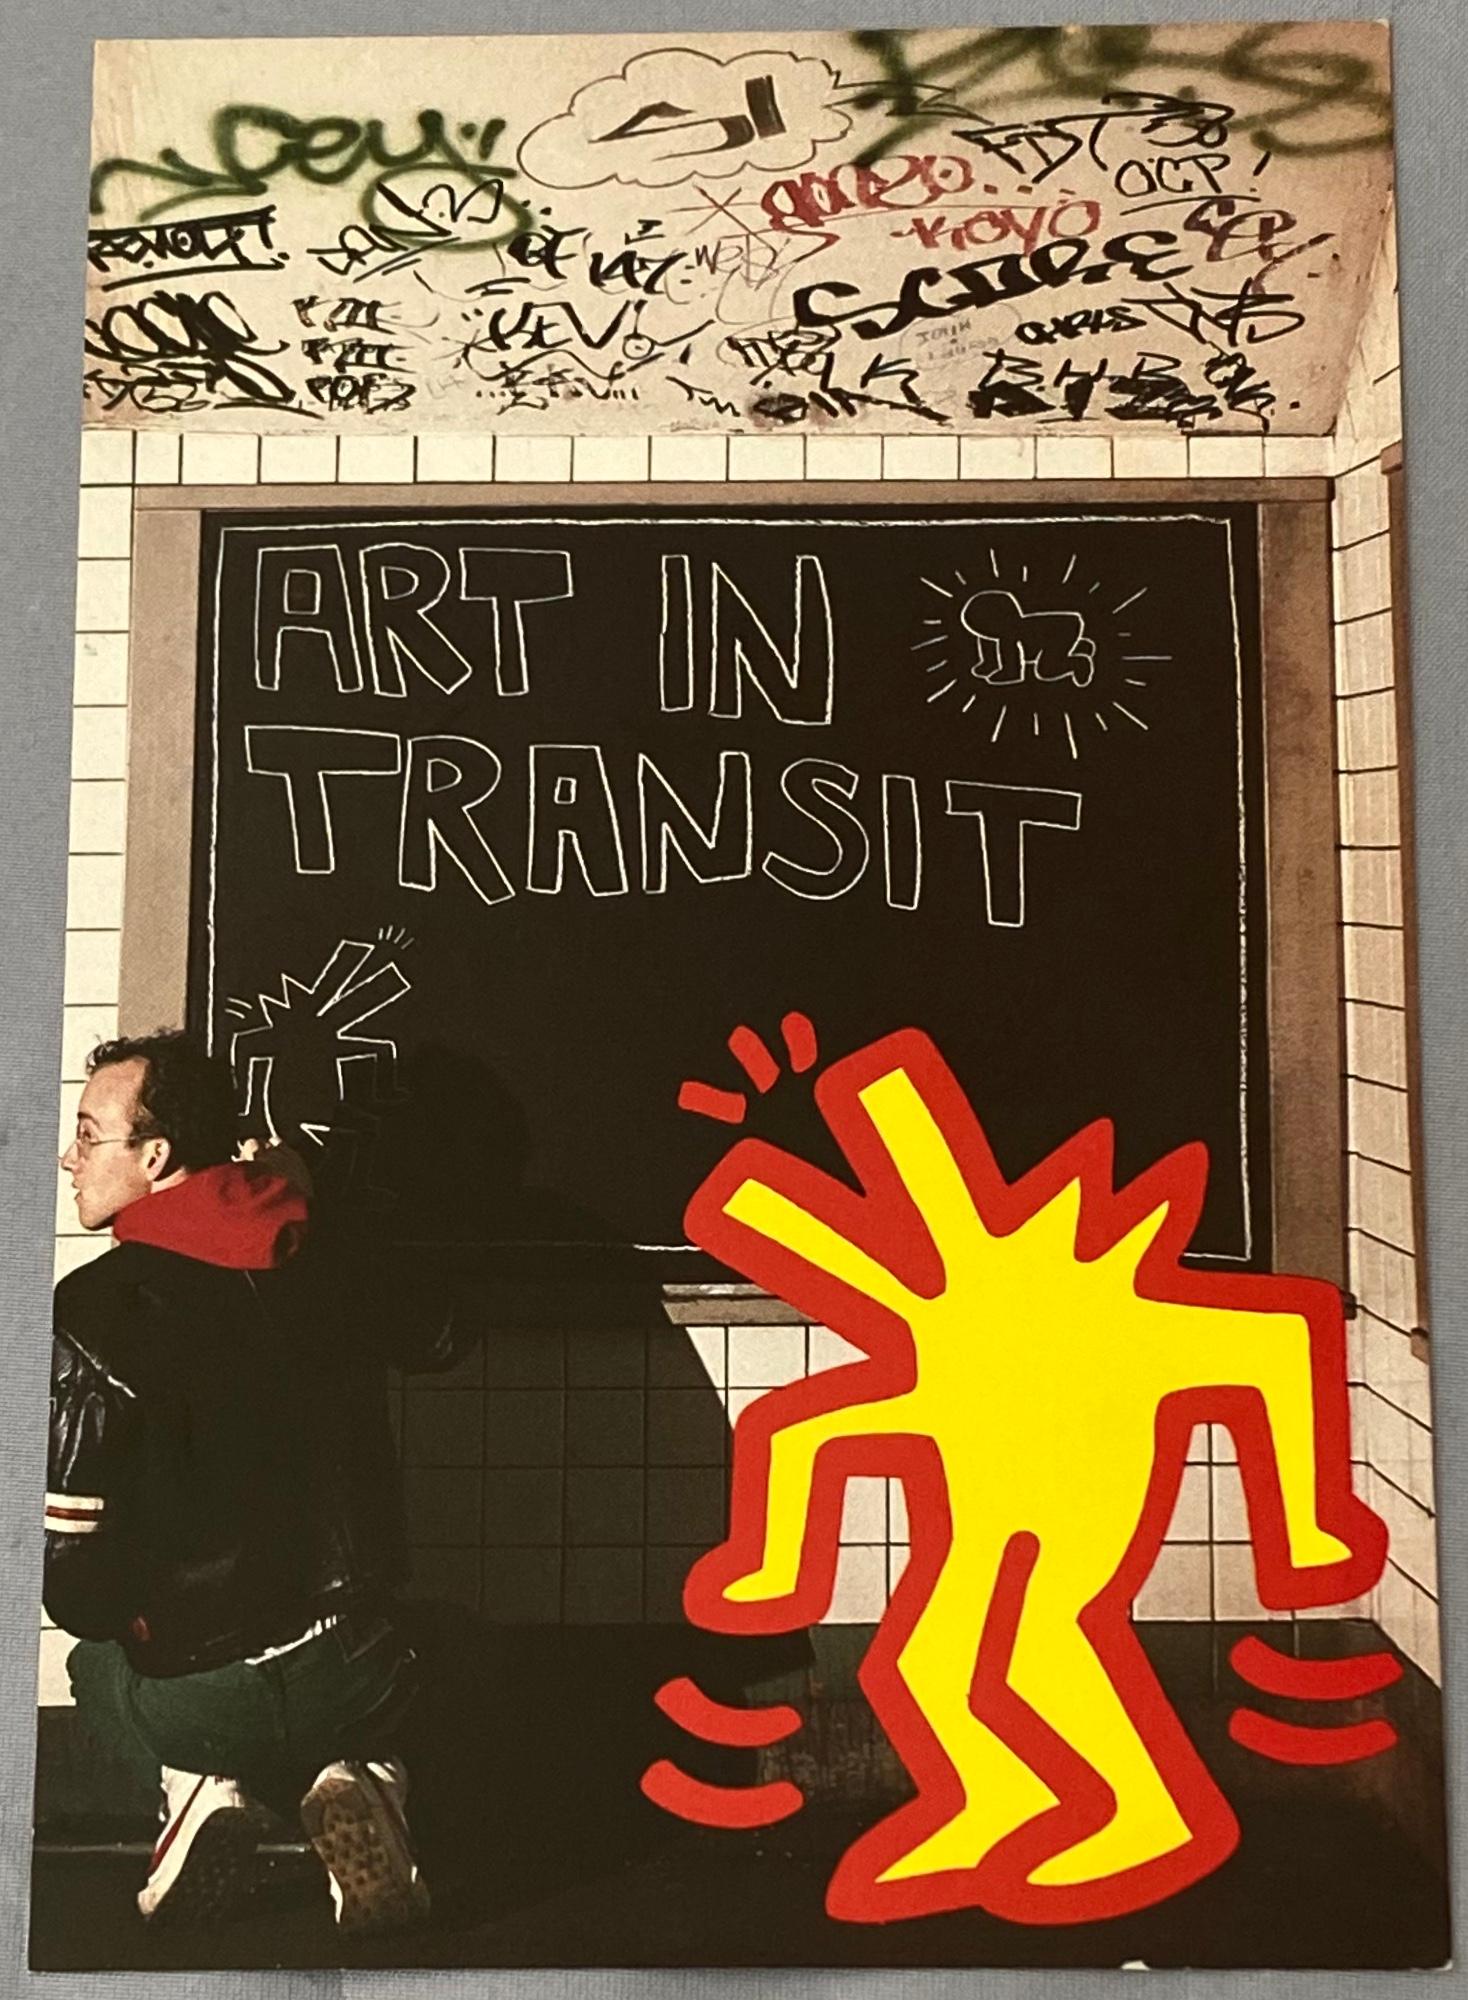 1984 Keith Haring Tseng Kwong Chi Art In Transit announcement - Print by (after) Keith Haring